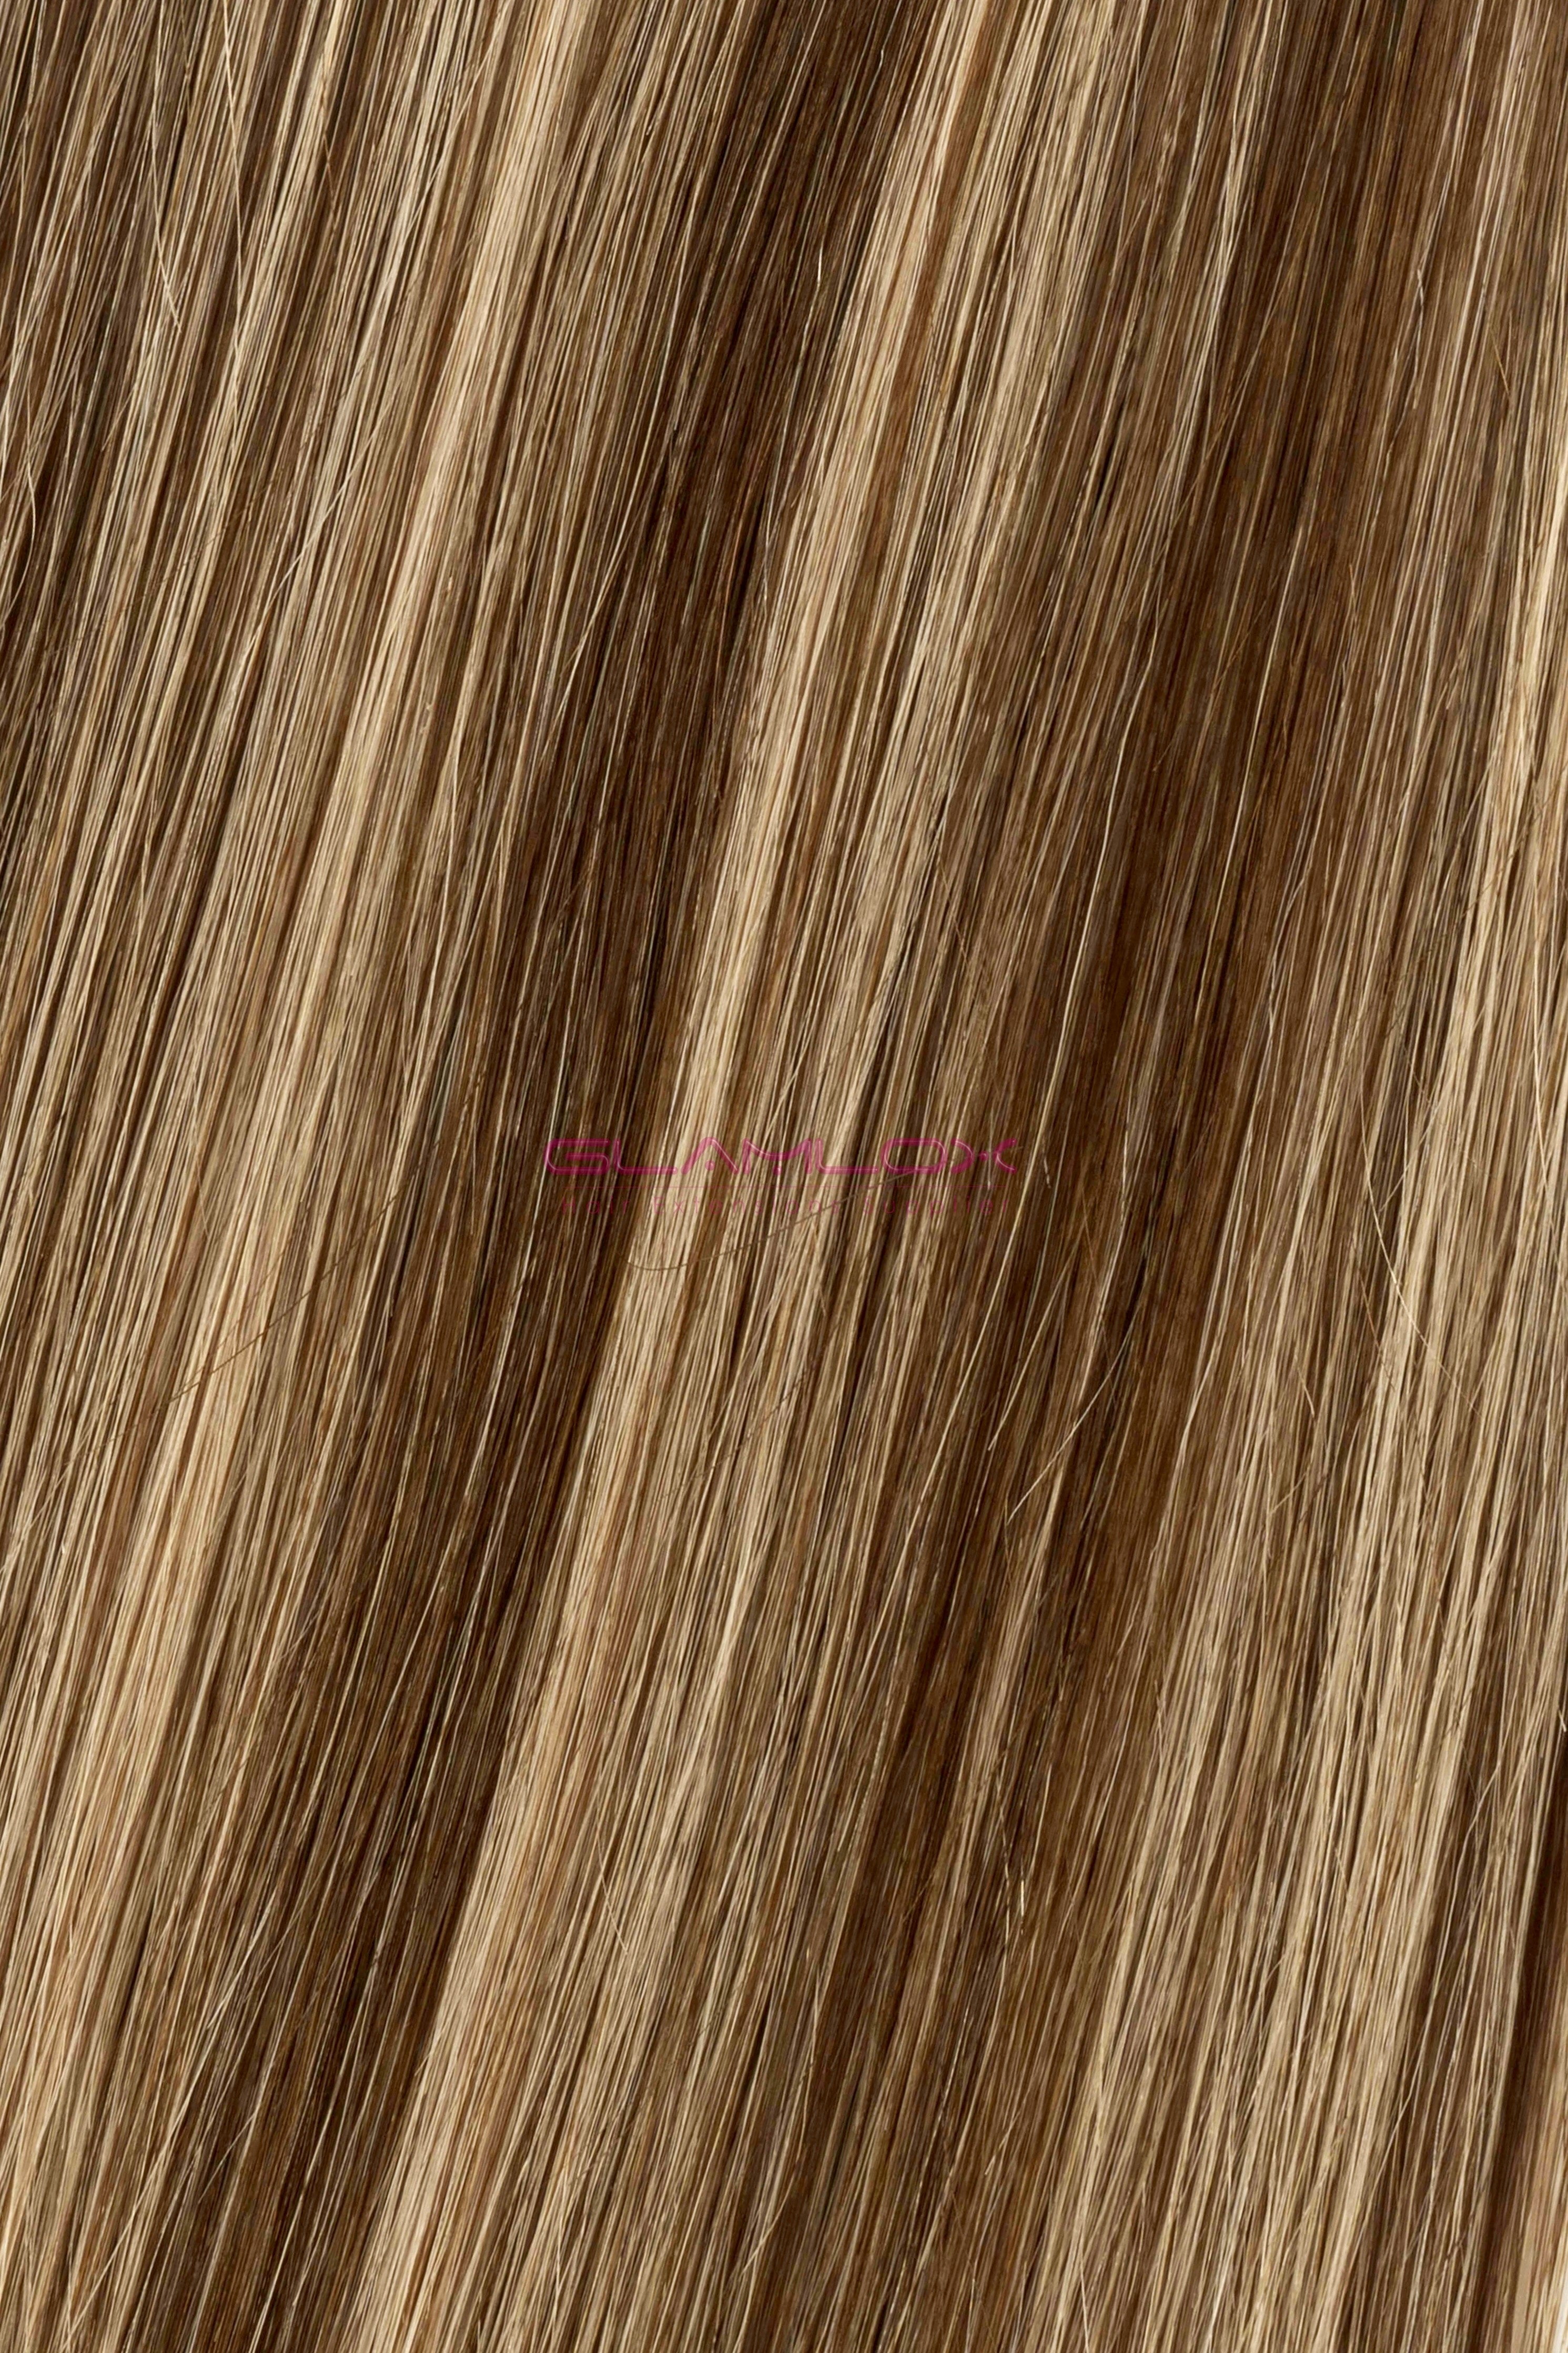 18" Nano Ring Hair Extensions - Russian Mongolian Double Drawn Remy Human Hair - 100 Strands